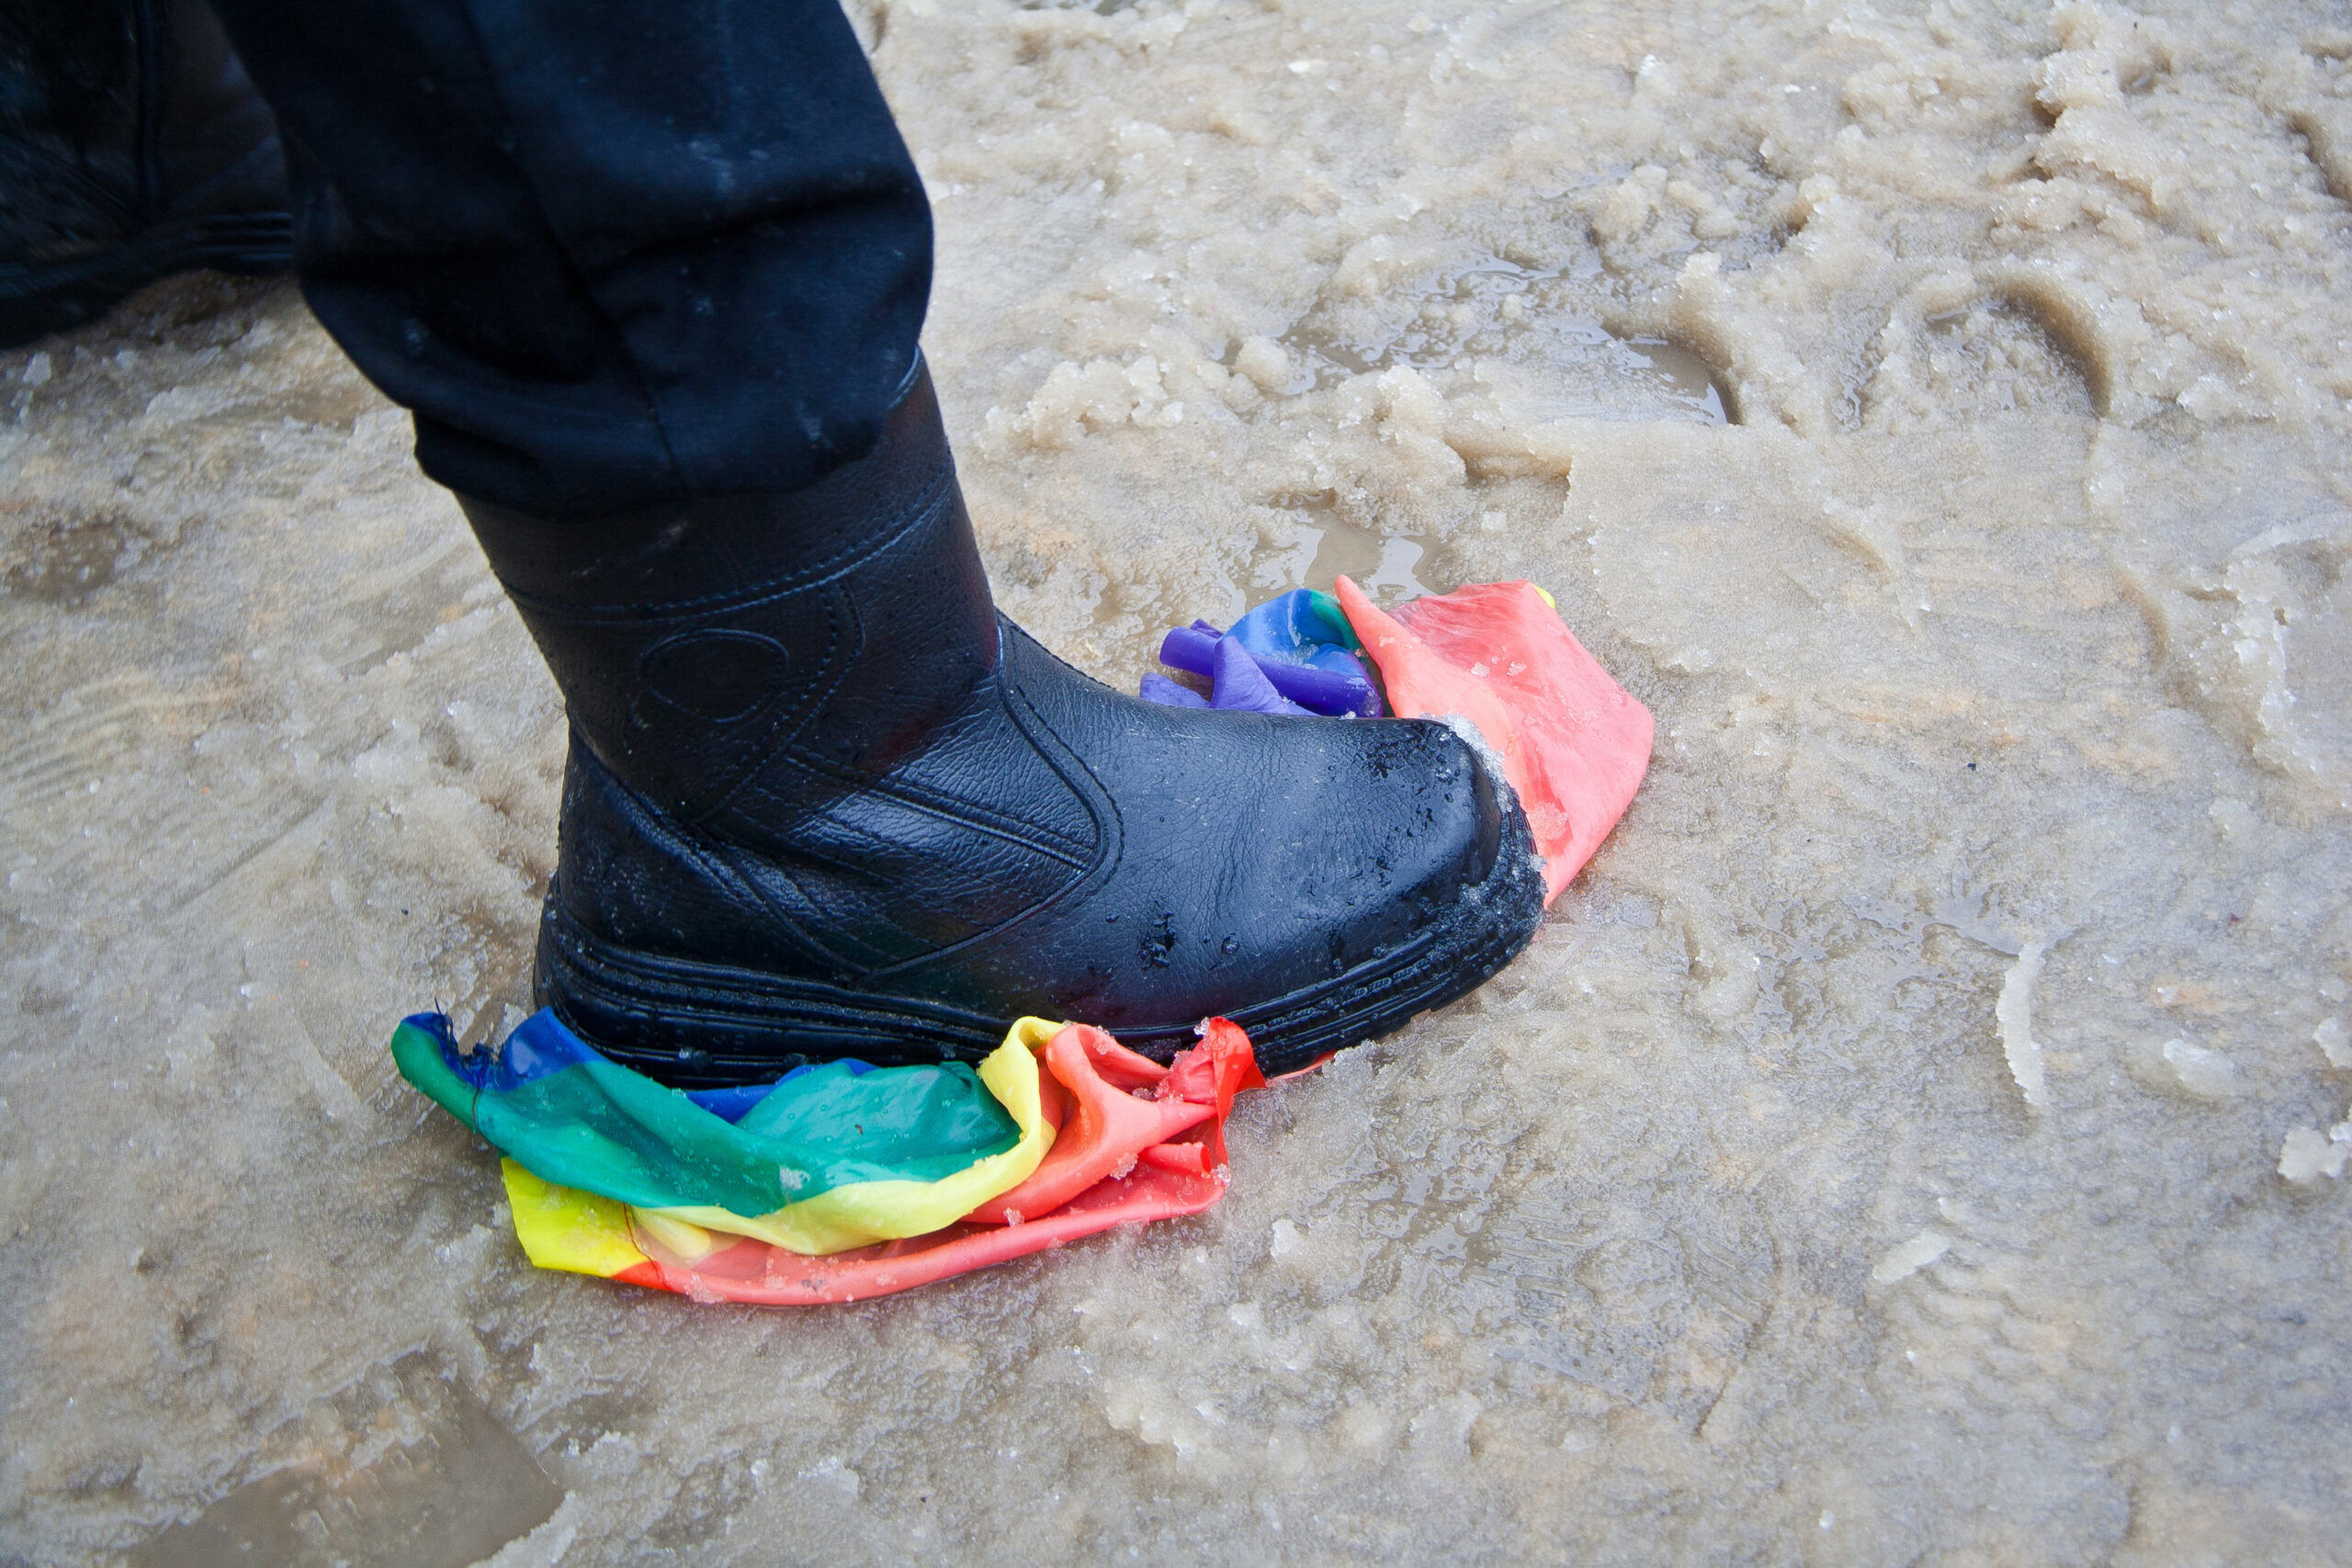 Foot stomping on a Pride flag in the sand